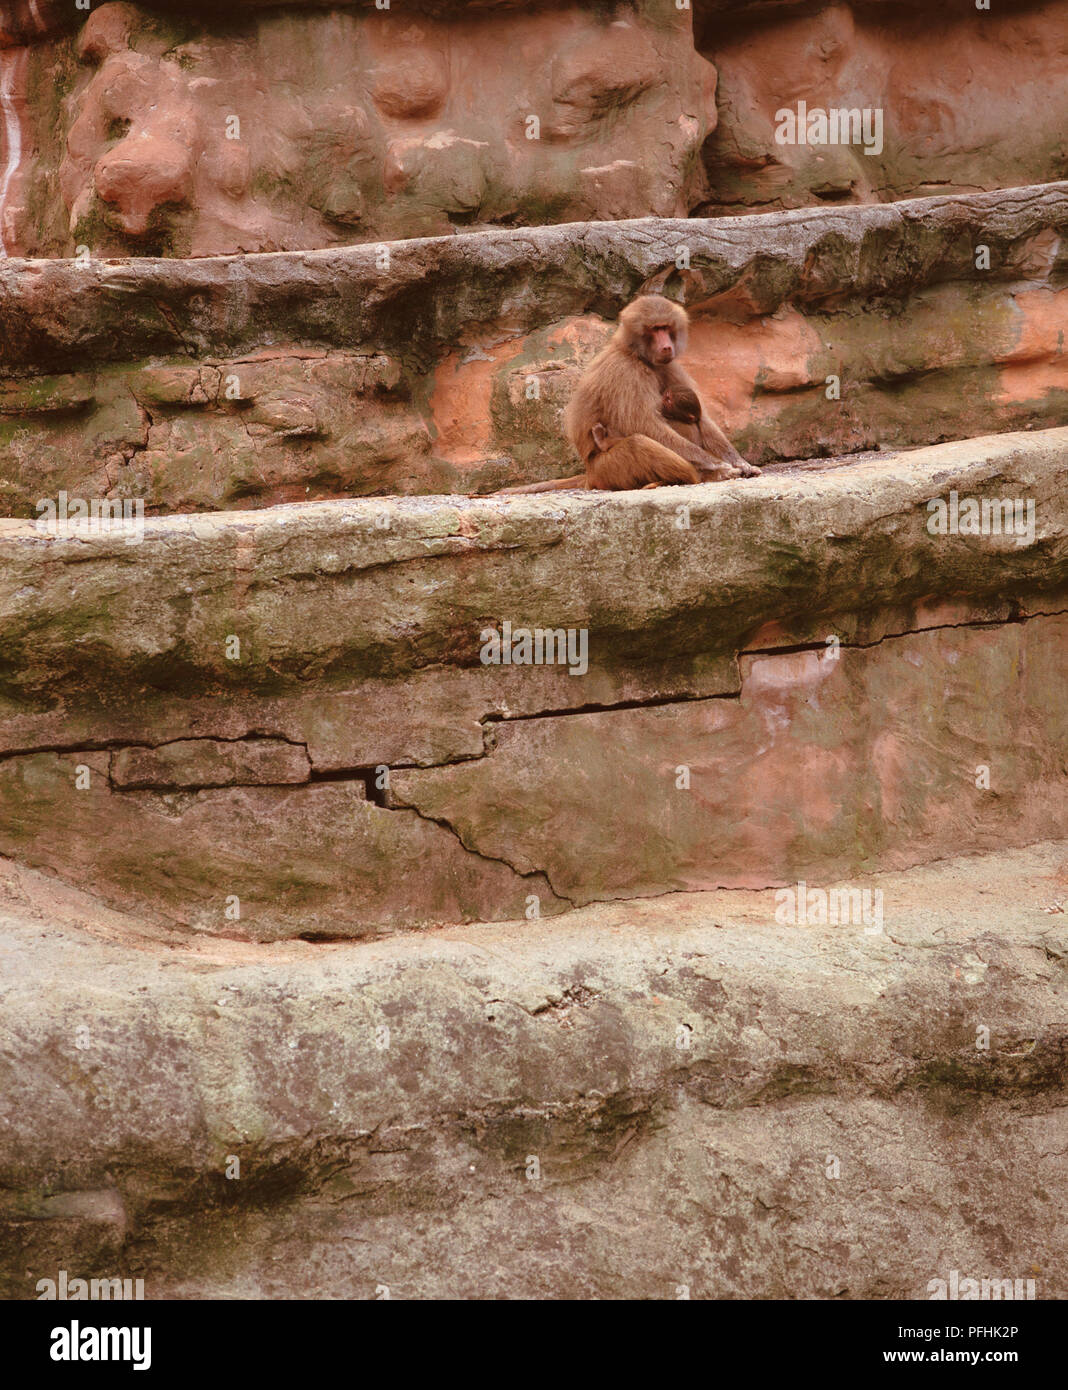 Baboons, Unidentified Papio Species, sitting on rock wall, low angle view. Stock Photo